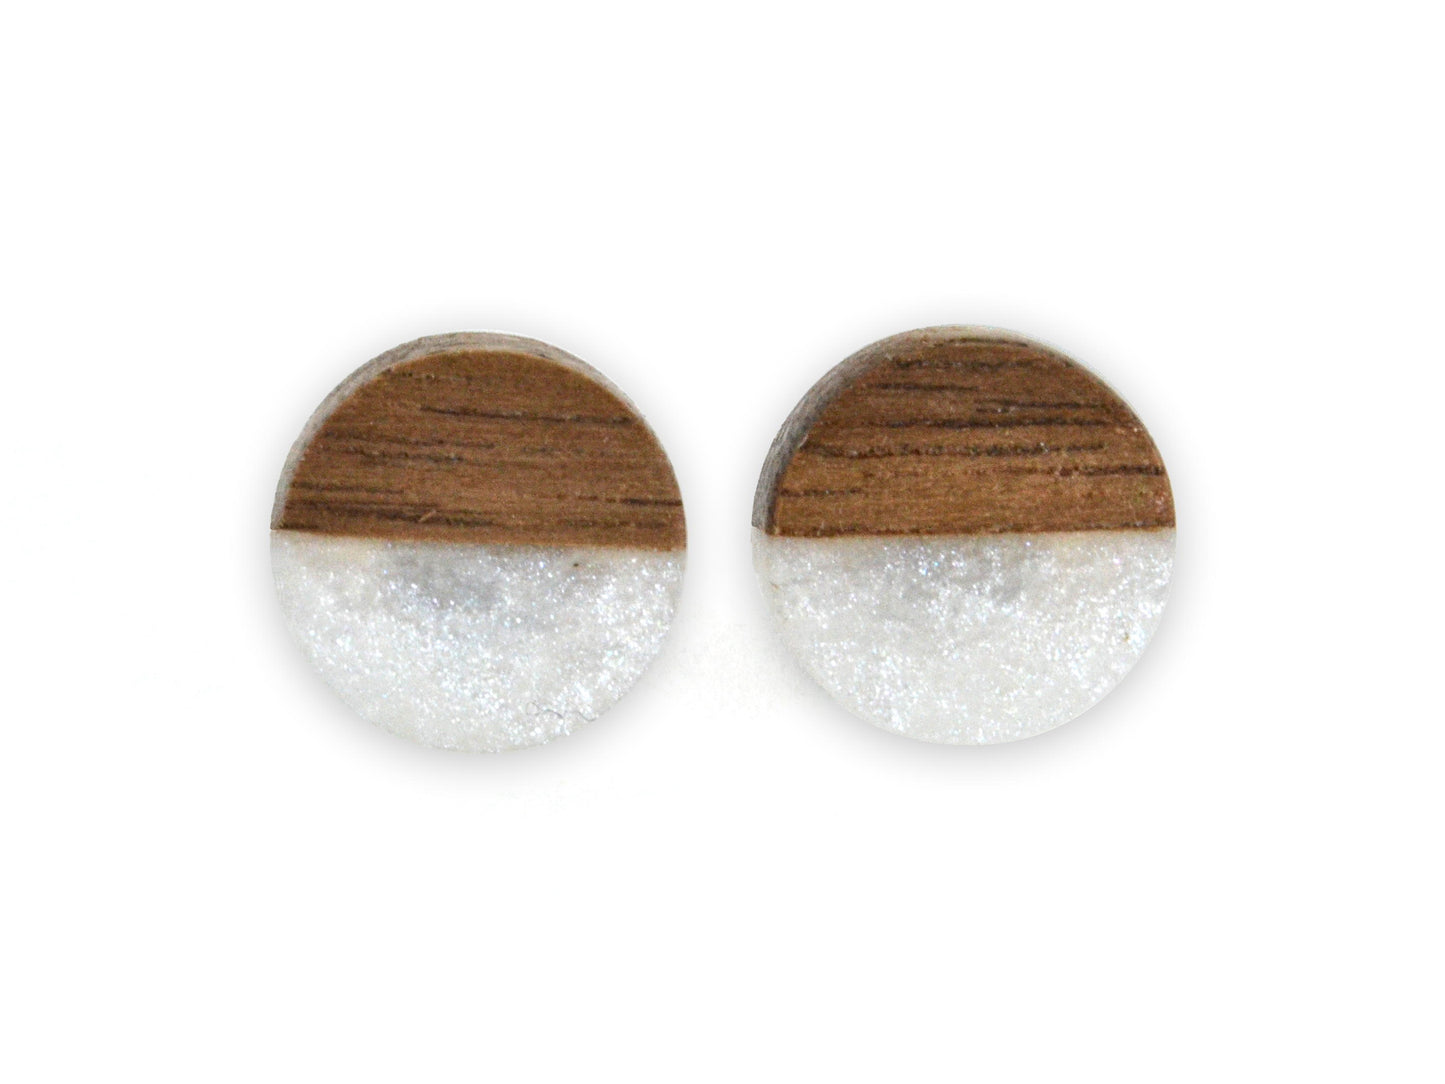 snow white and dark walnut wooden stud earring pair, comes with gift box